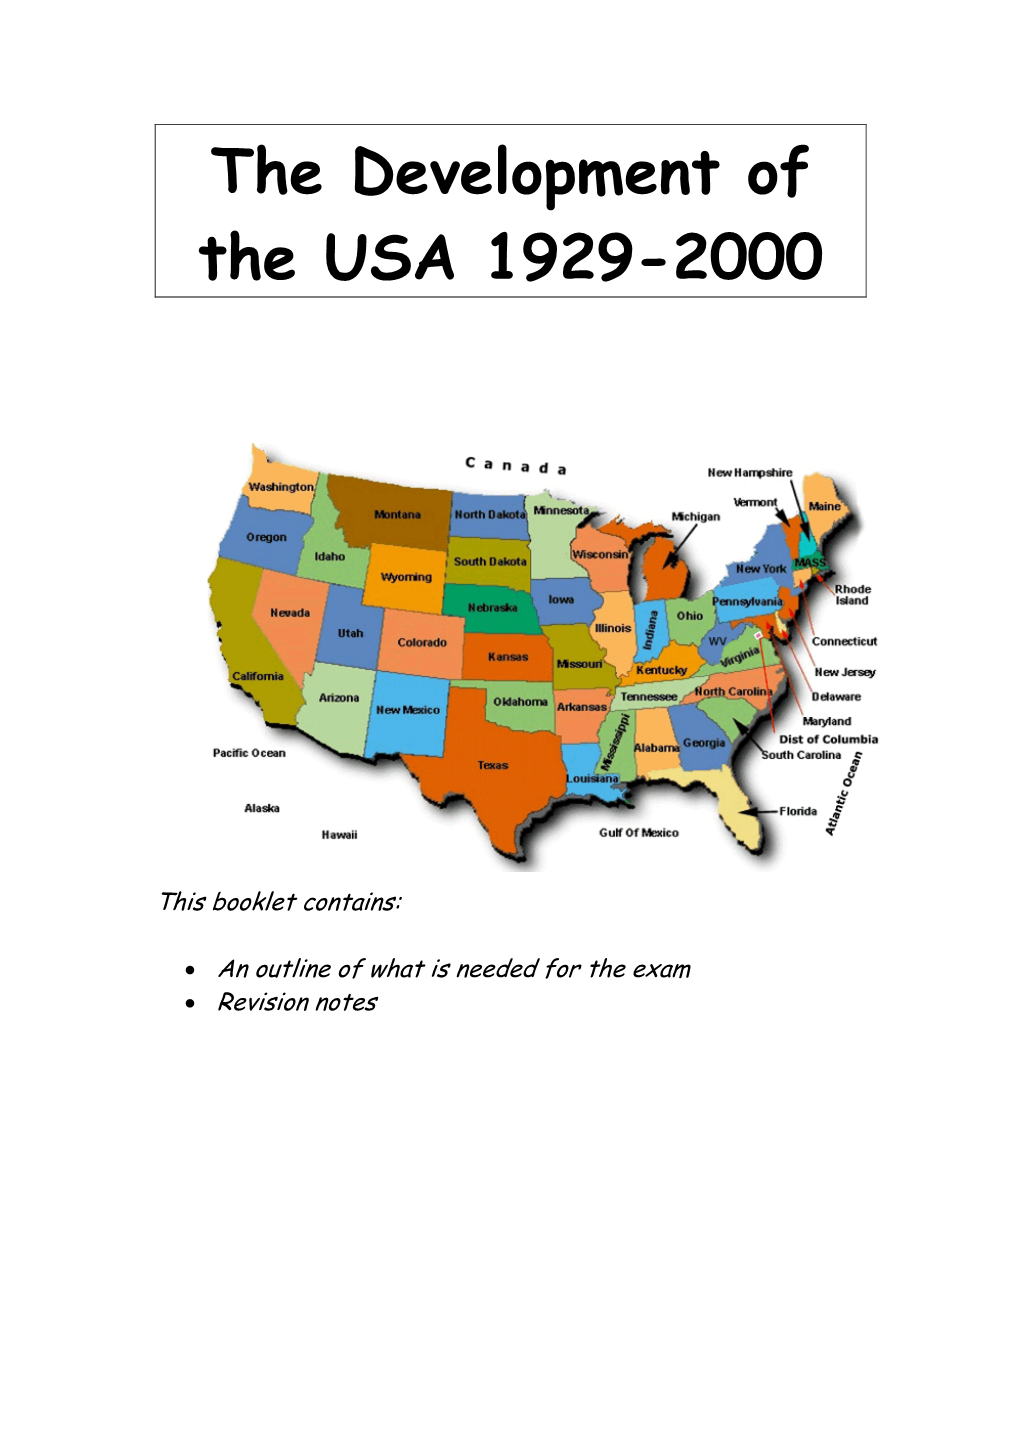 The Development of the USA 1929-2000